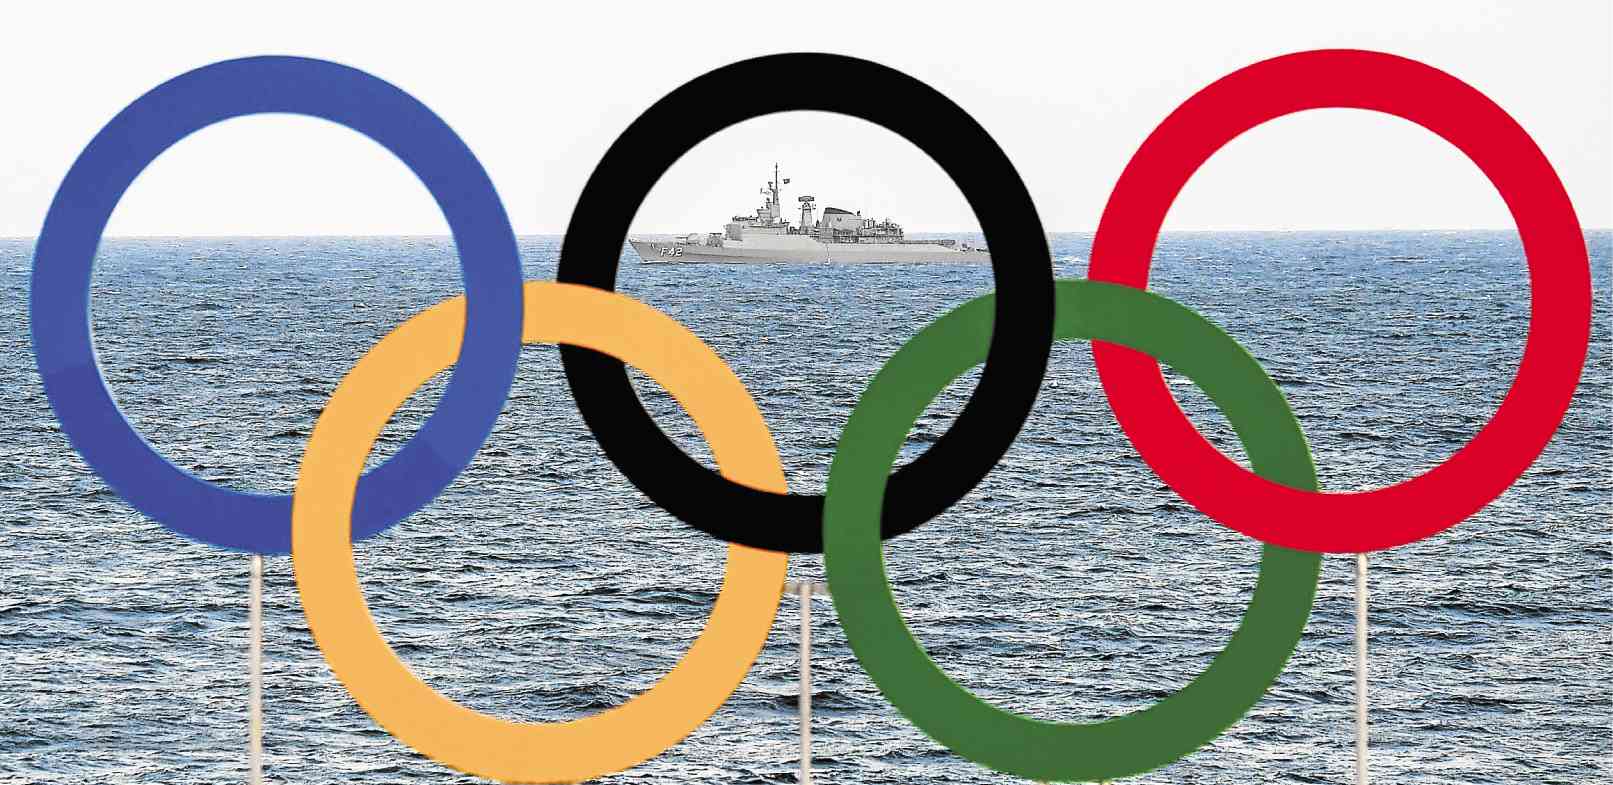 Rio opens today 31st Olympic Games | Inquirer Sports